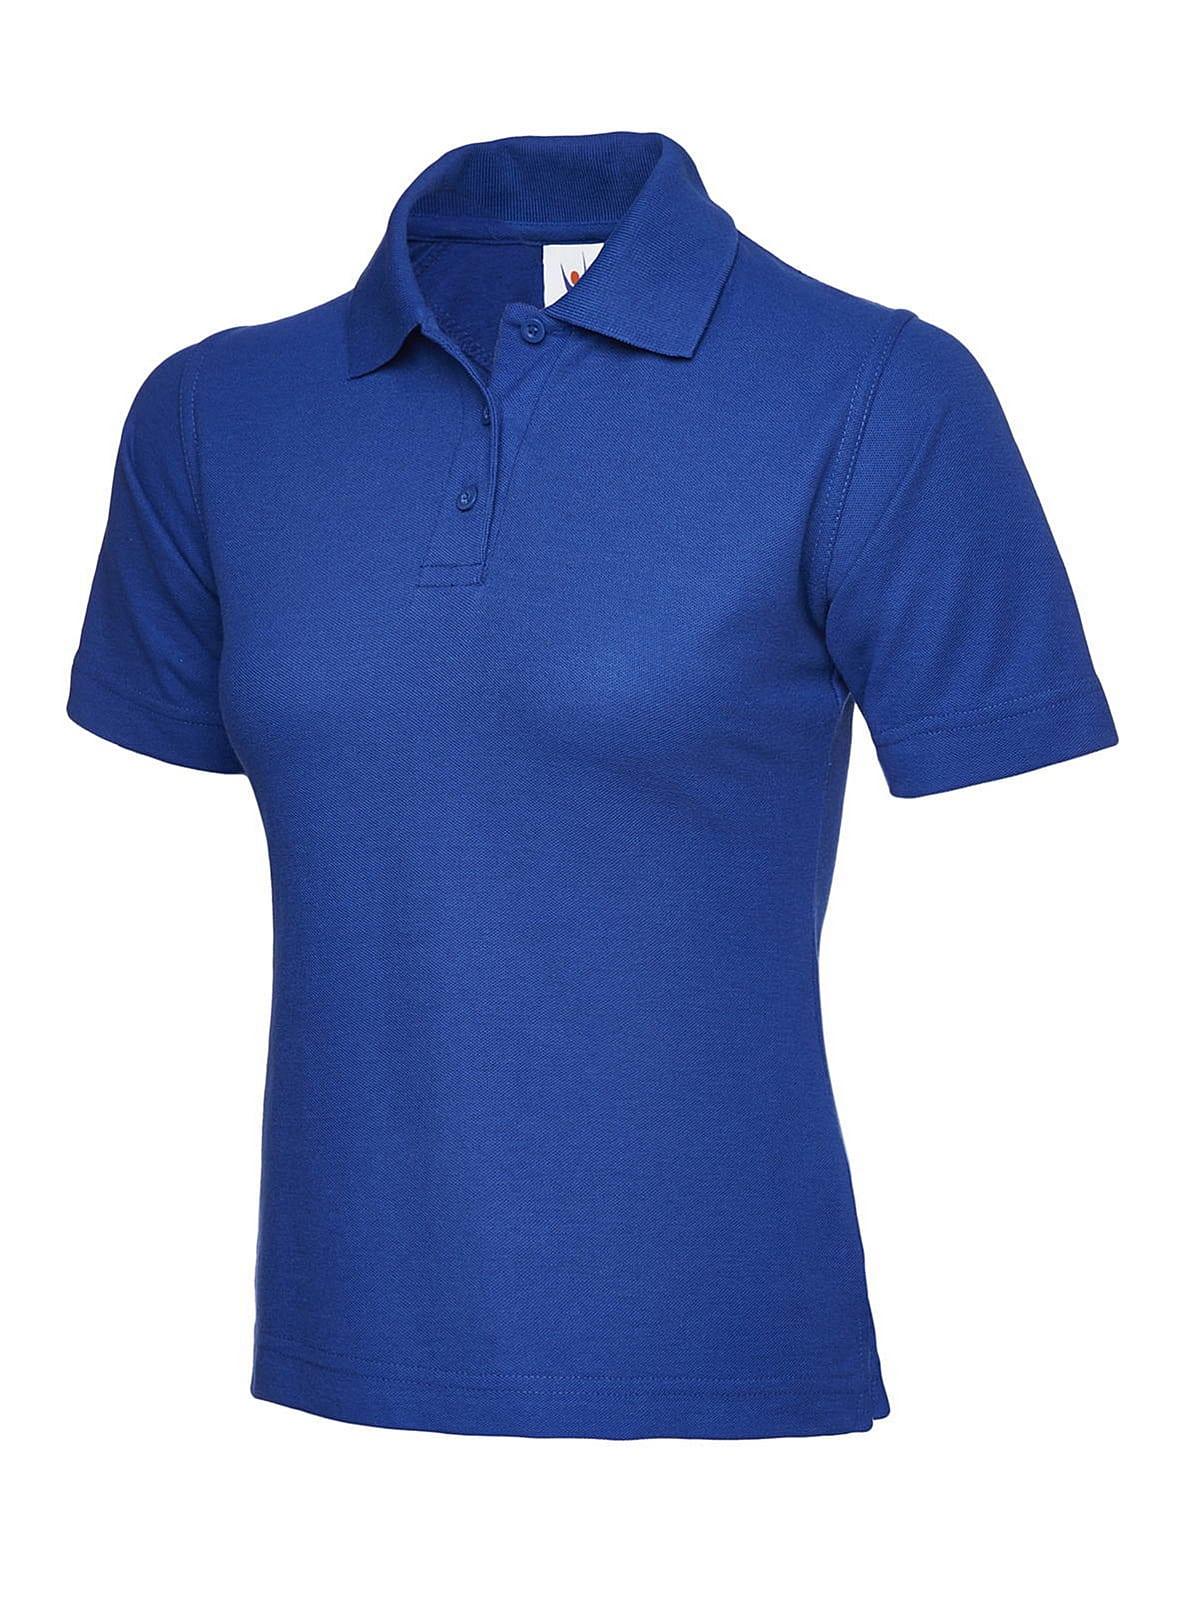 Uneek 220GSM Womens Polo Shirt in Royal Blue (Product Code: UC106)